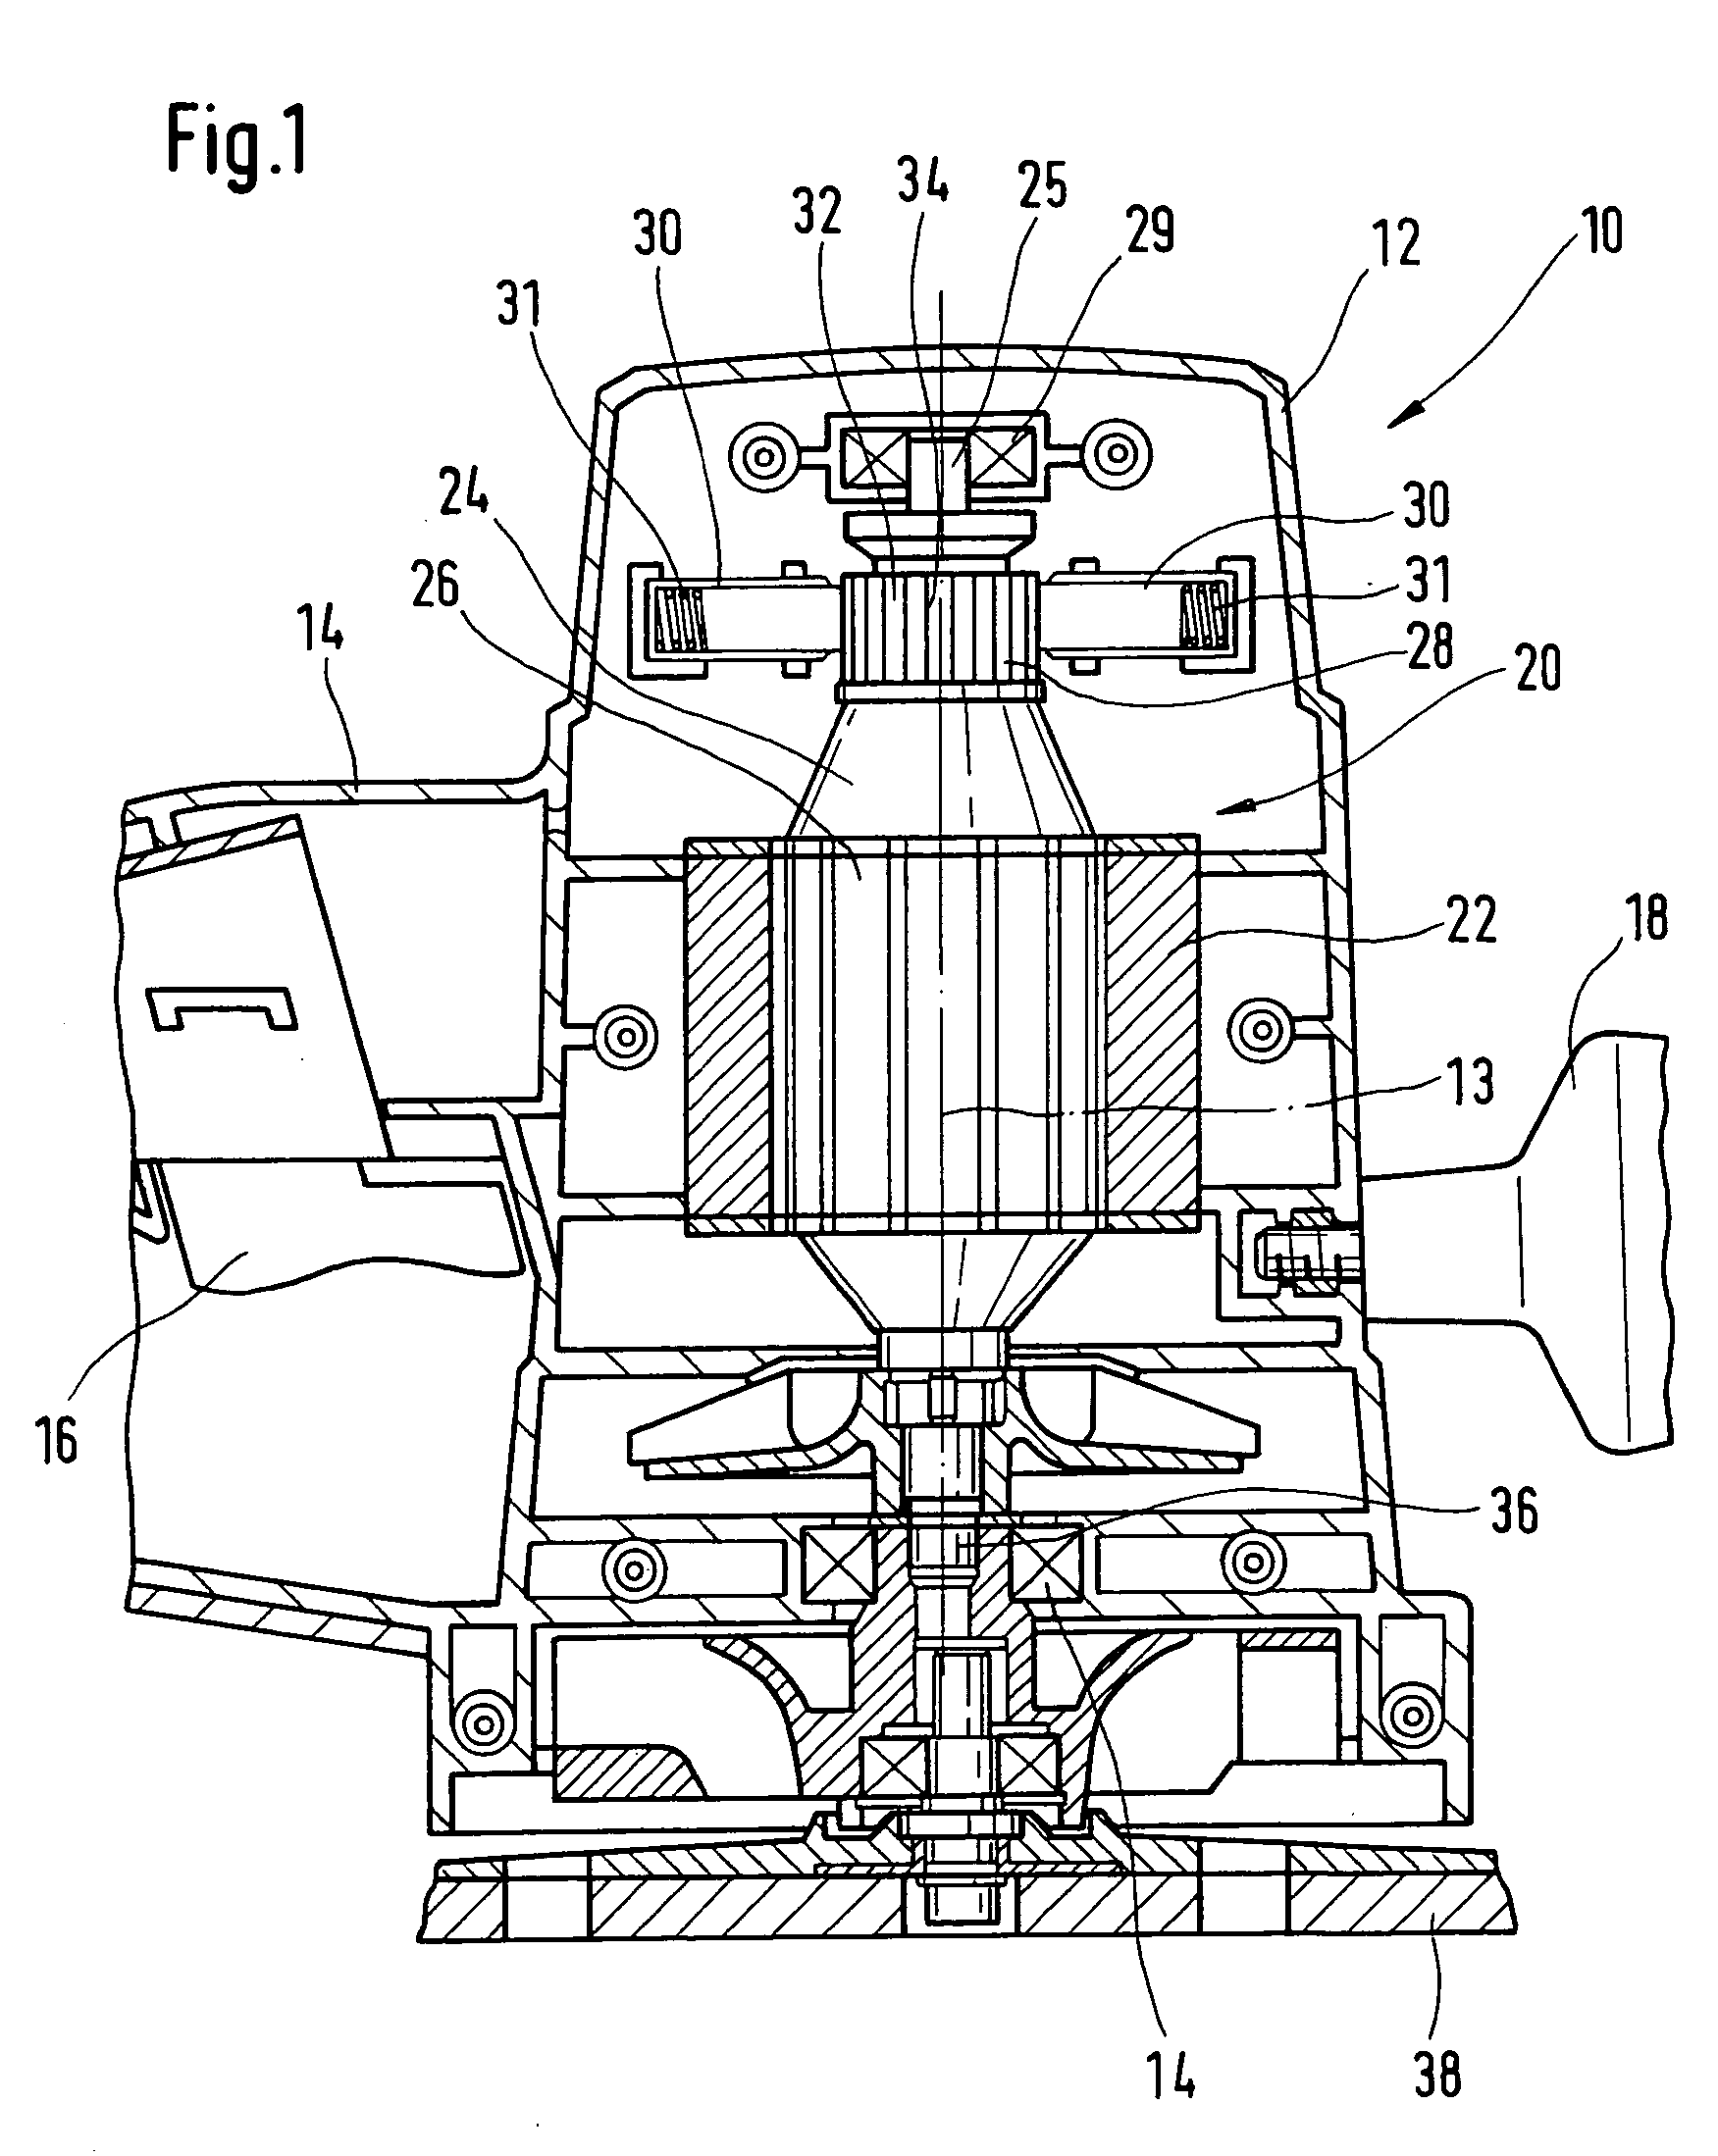 Electric manual machine tool driven by an electric motor